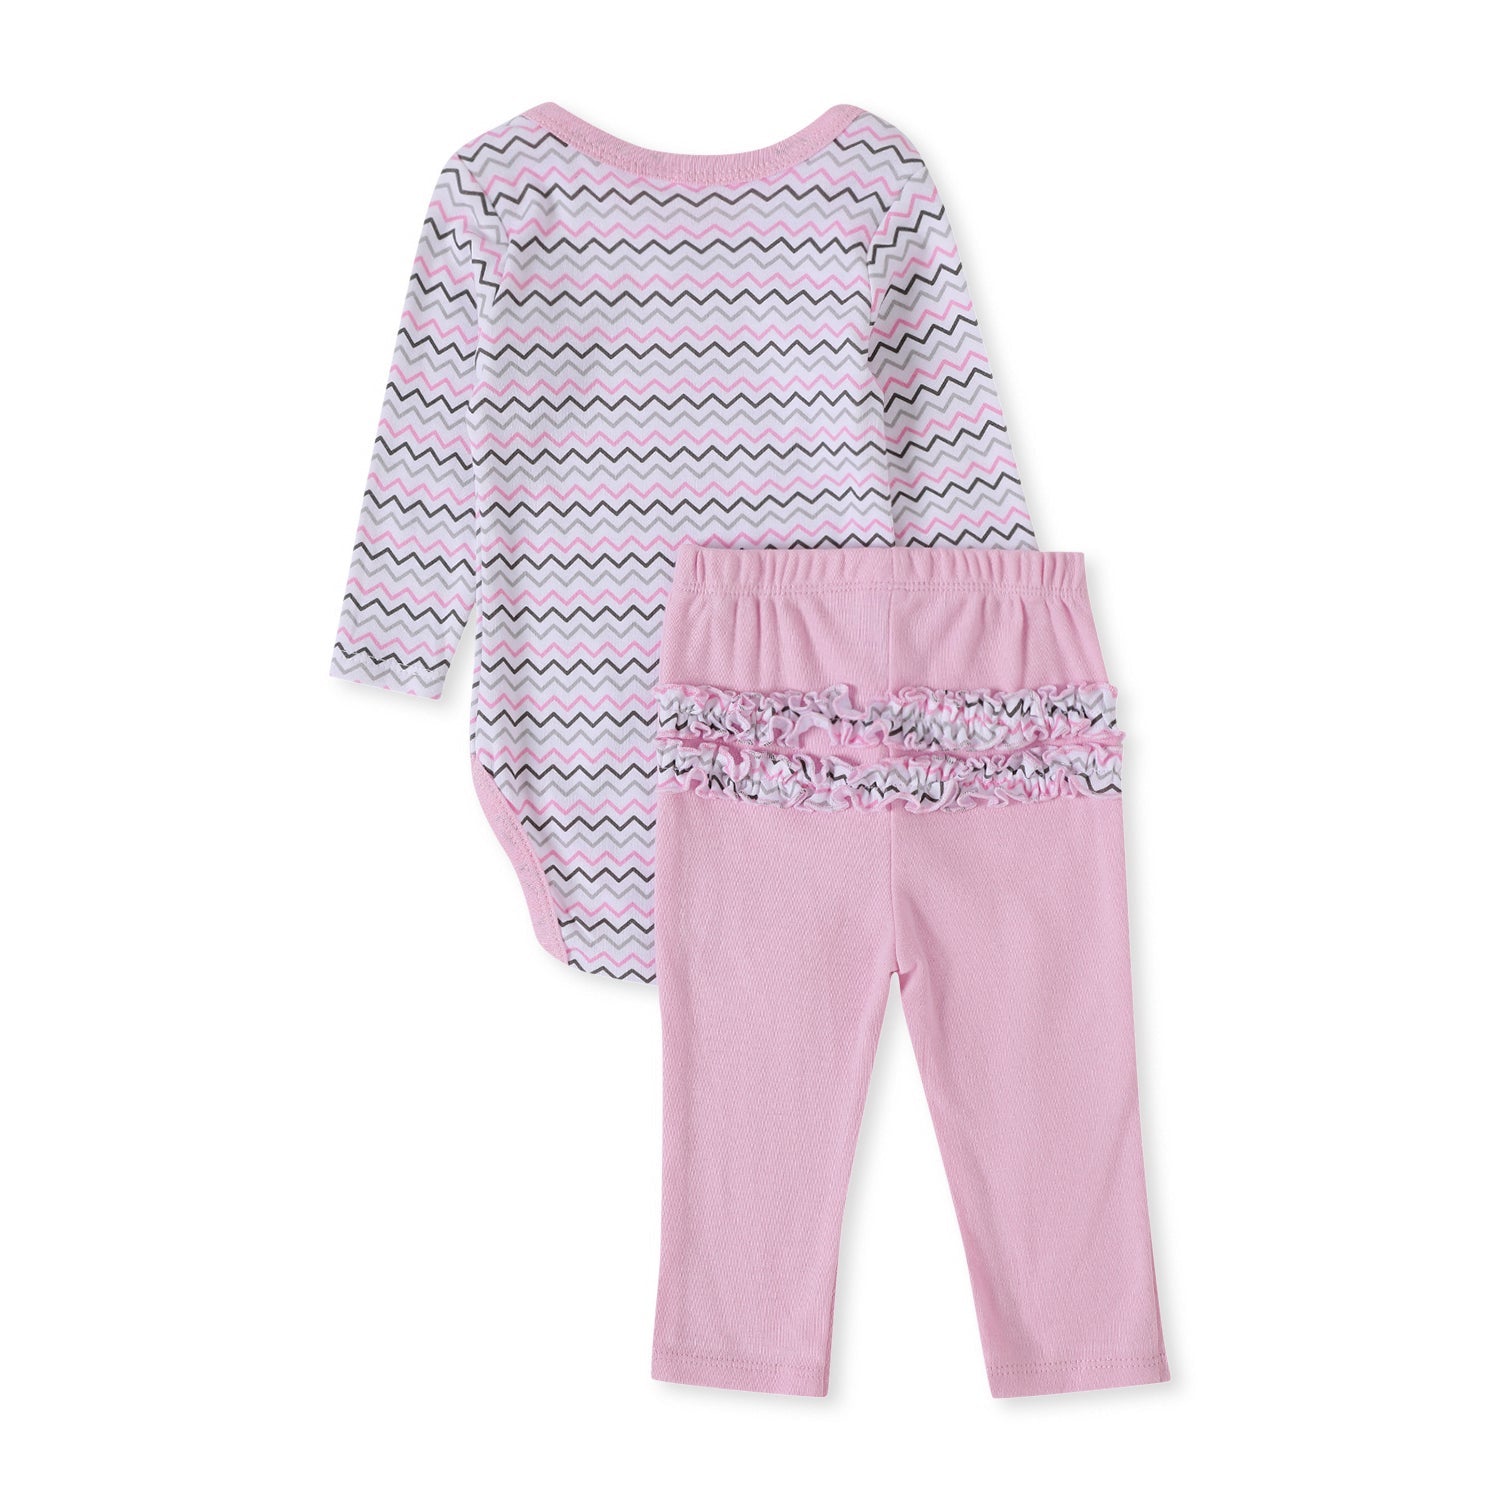 Giggles & Wiggles Chevron Pink Pink Onesies With Legging